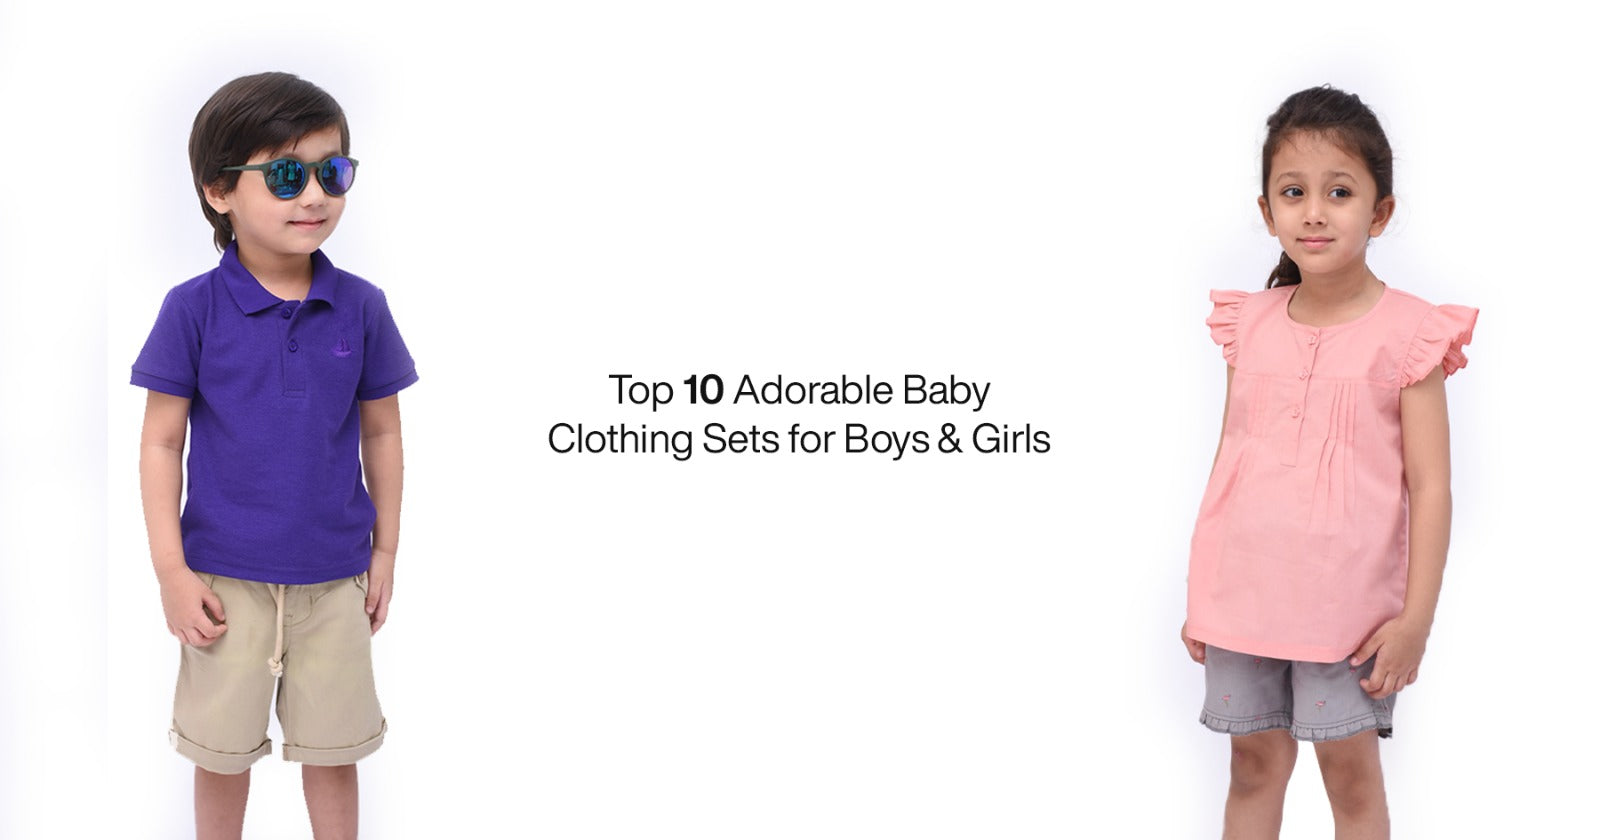 Top 10 Adorable Baby Clothing Sets for Boys & Girls